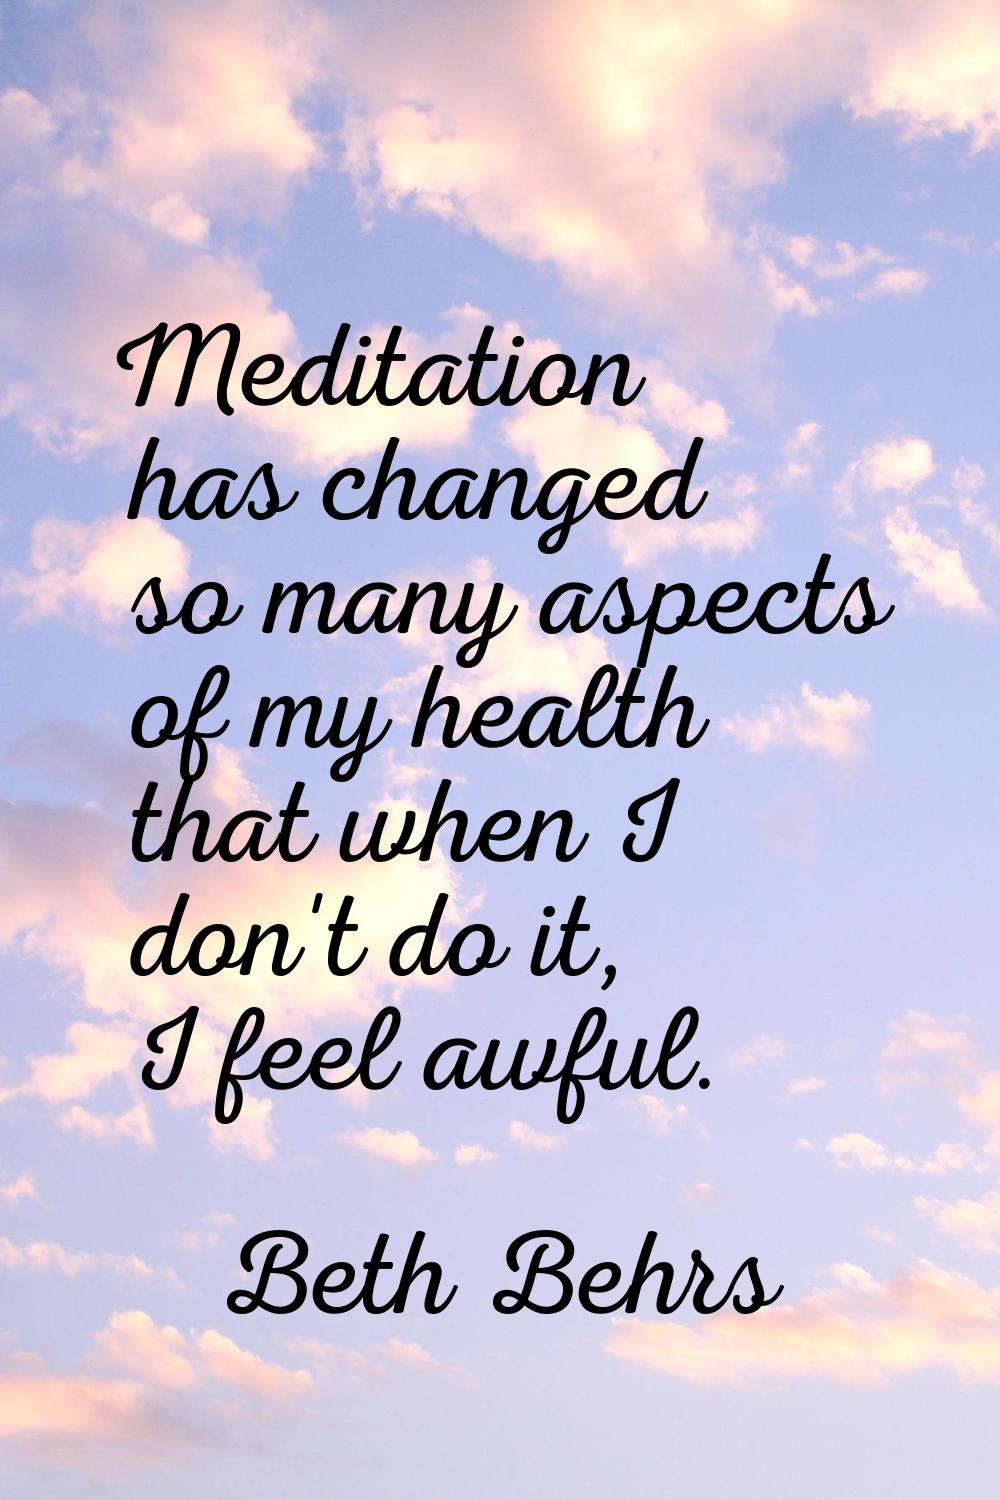 Meditation has changed so many aspects of my health that when I don't do it, I feel awful.